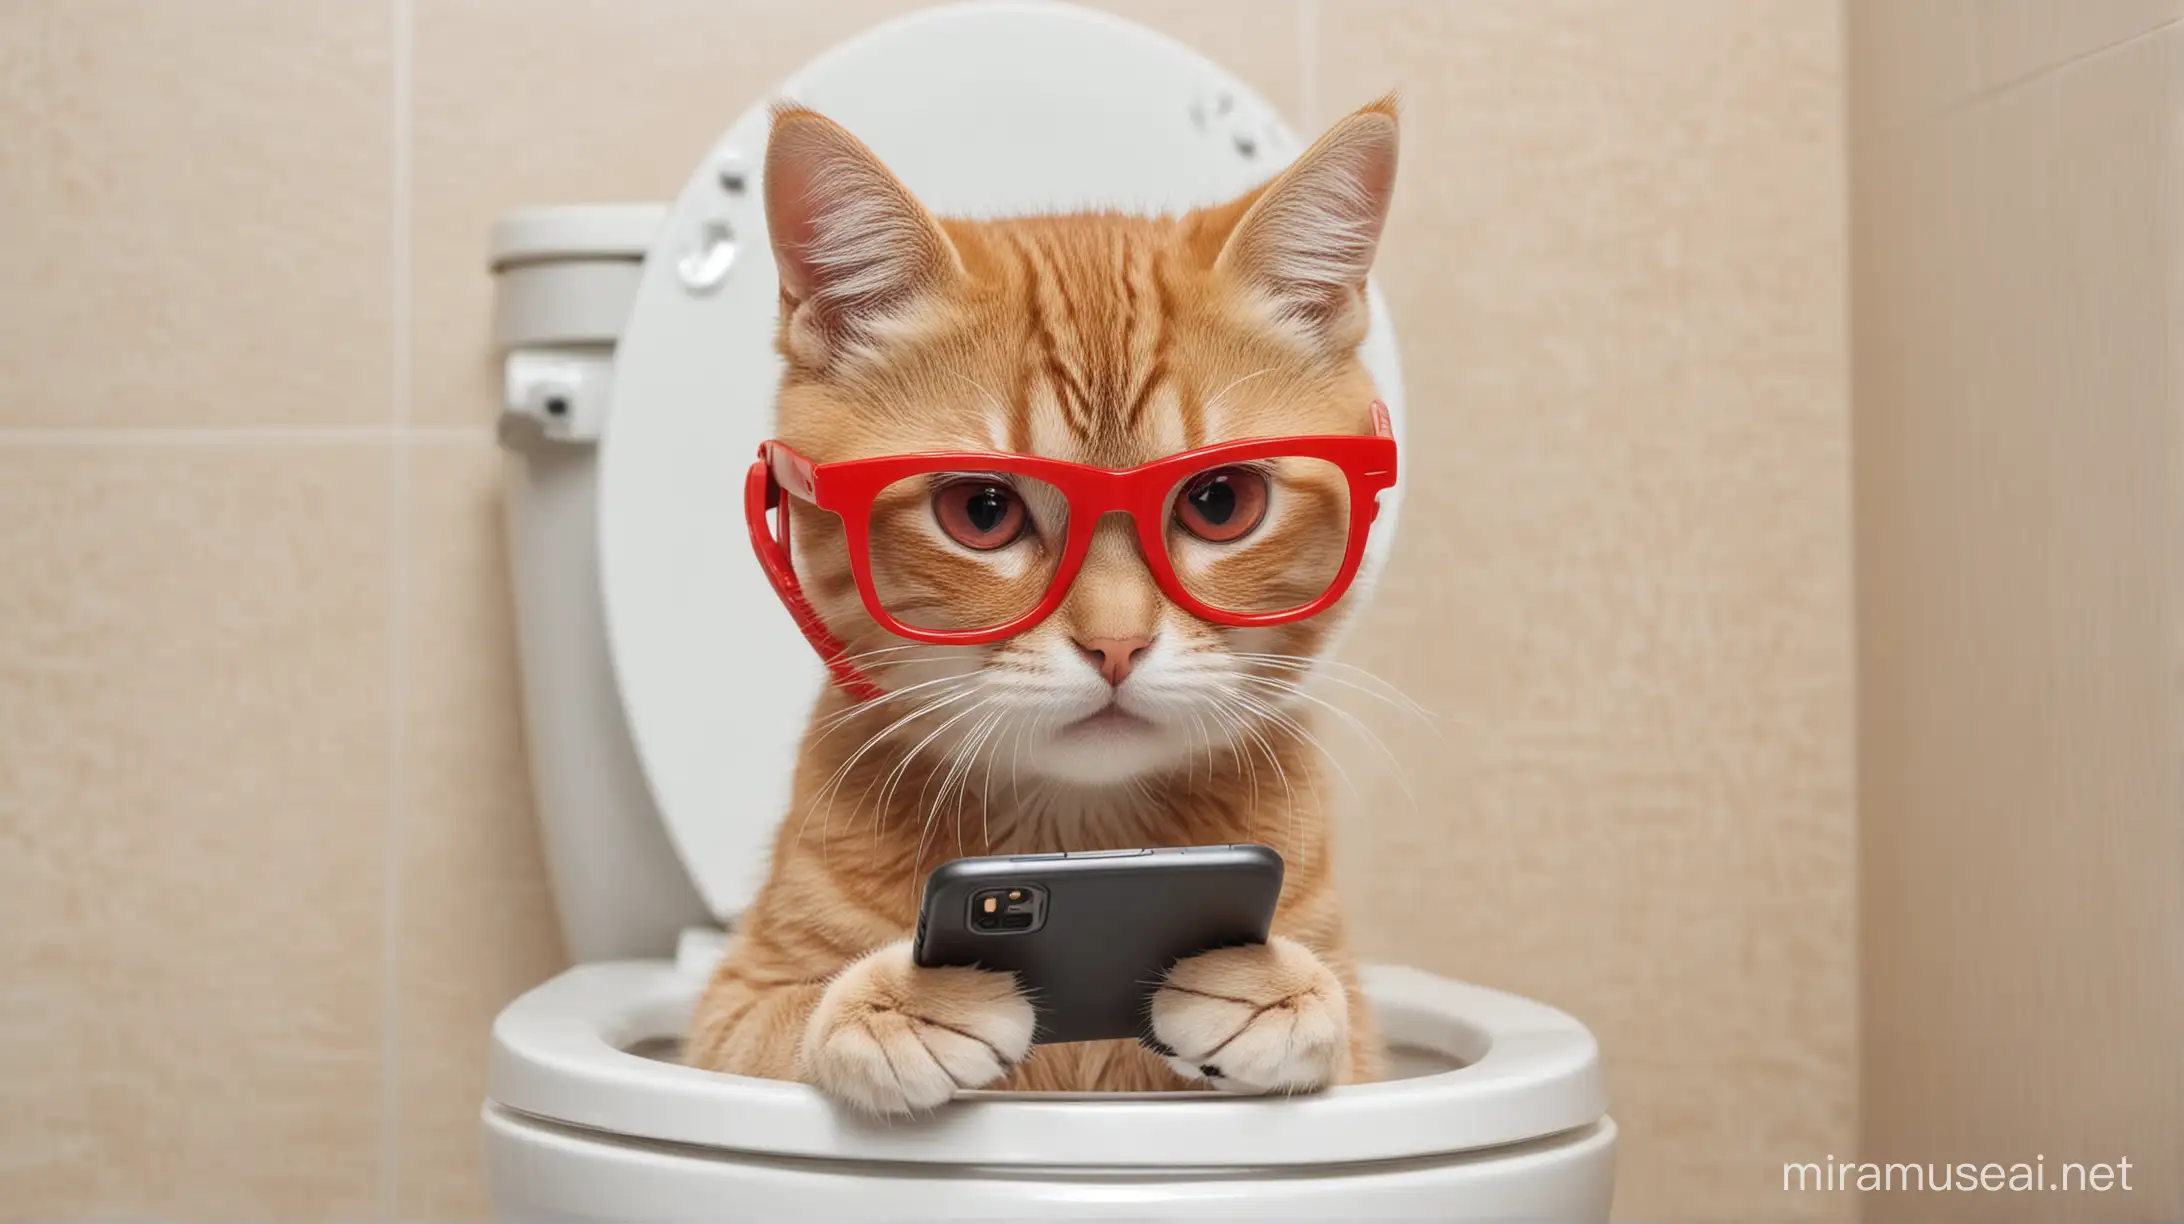 Playful Cat with Red Glasses Using Phone in Bathroom